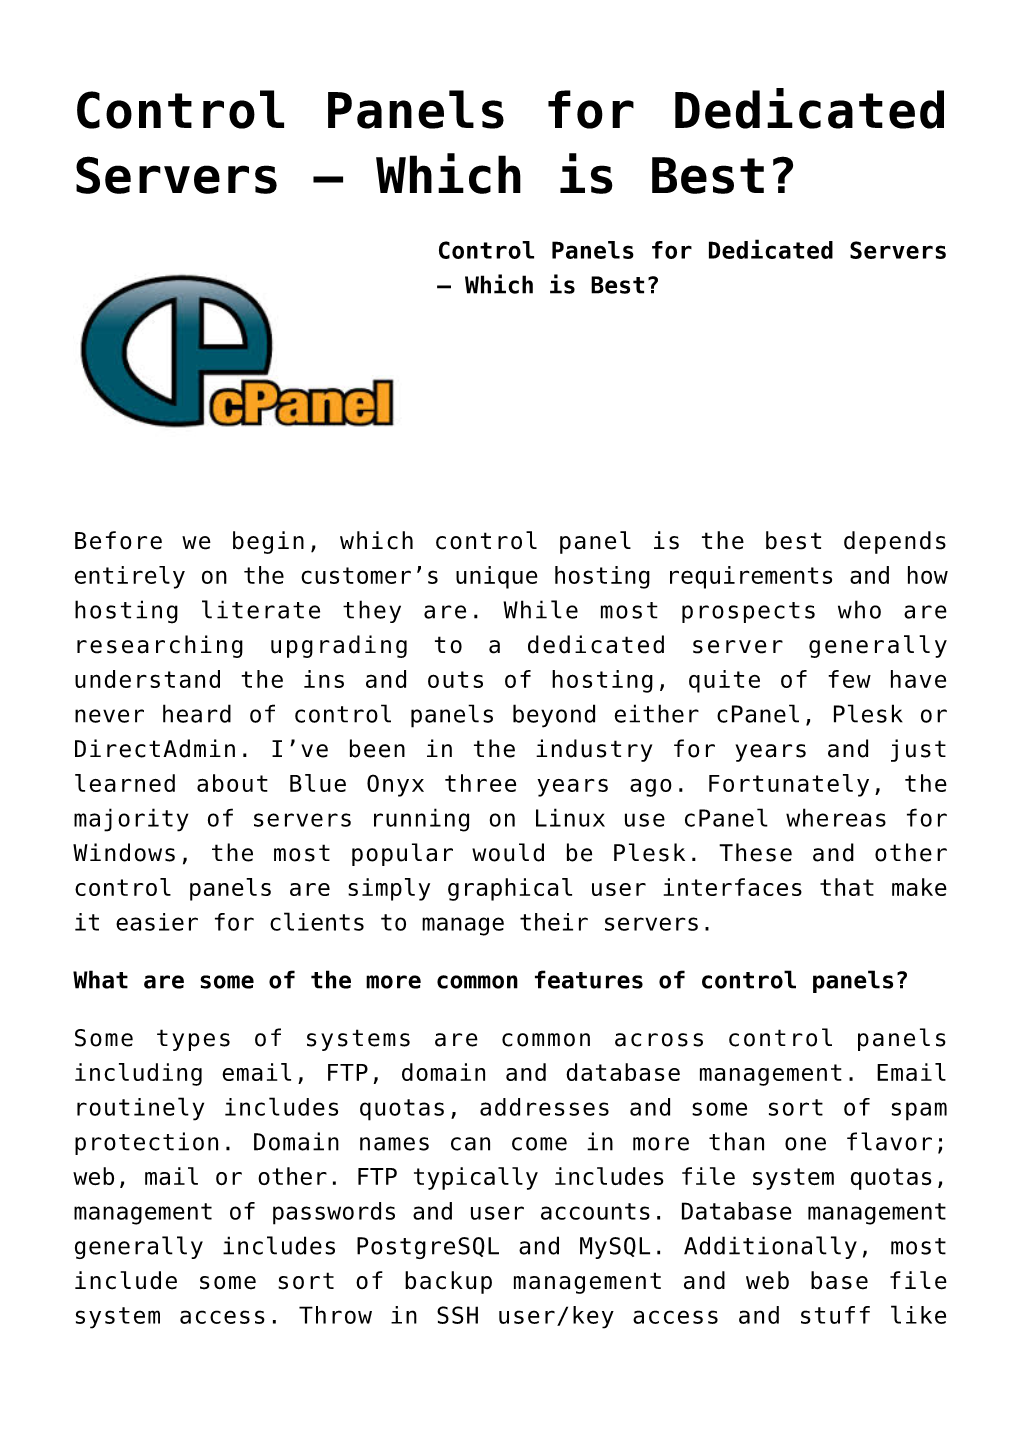 Control Panels for Dedicated Servers – Which Is Best?